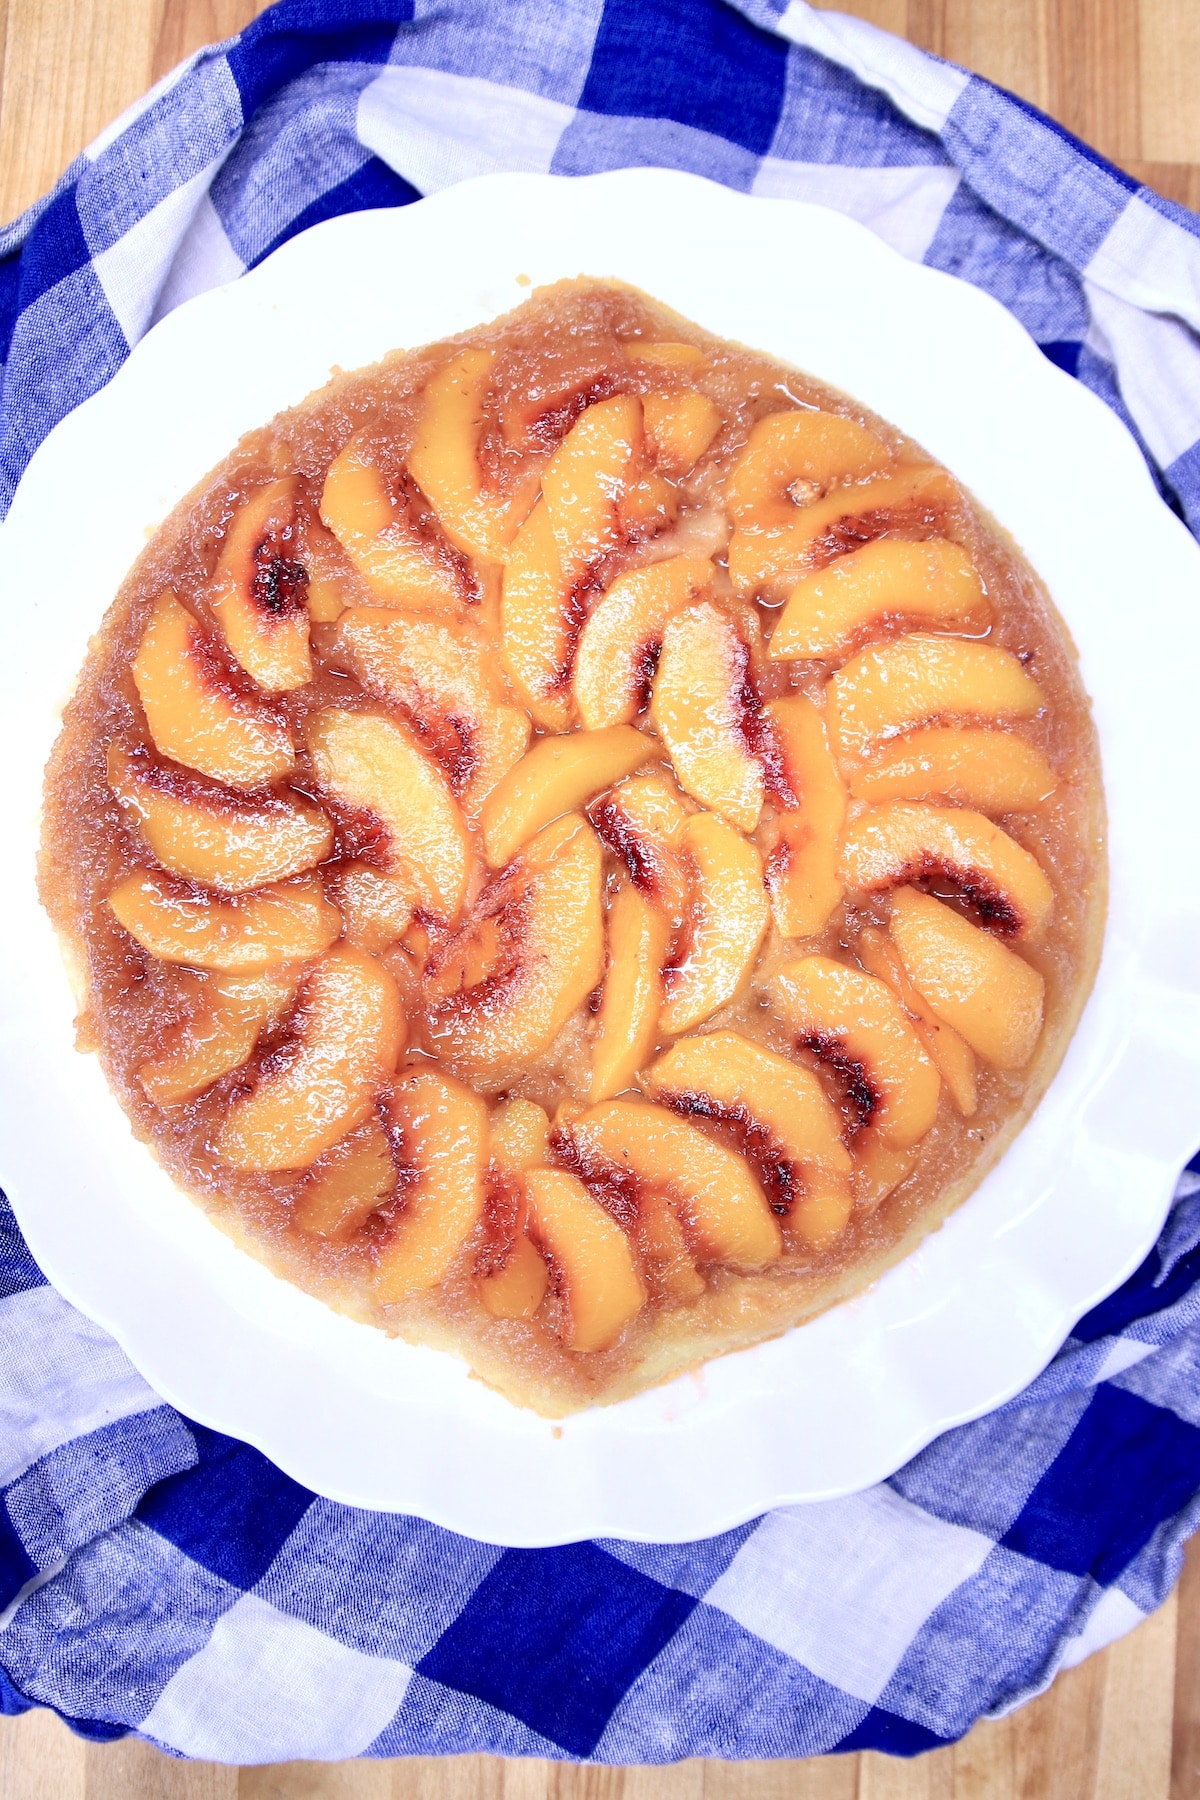 Peach upside down cake on a white platter, blue and white check cloth beneath.